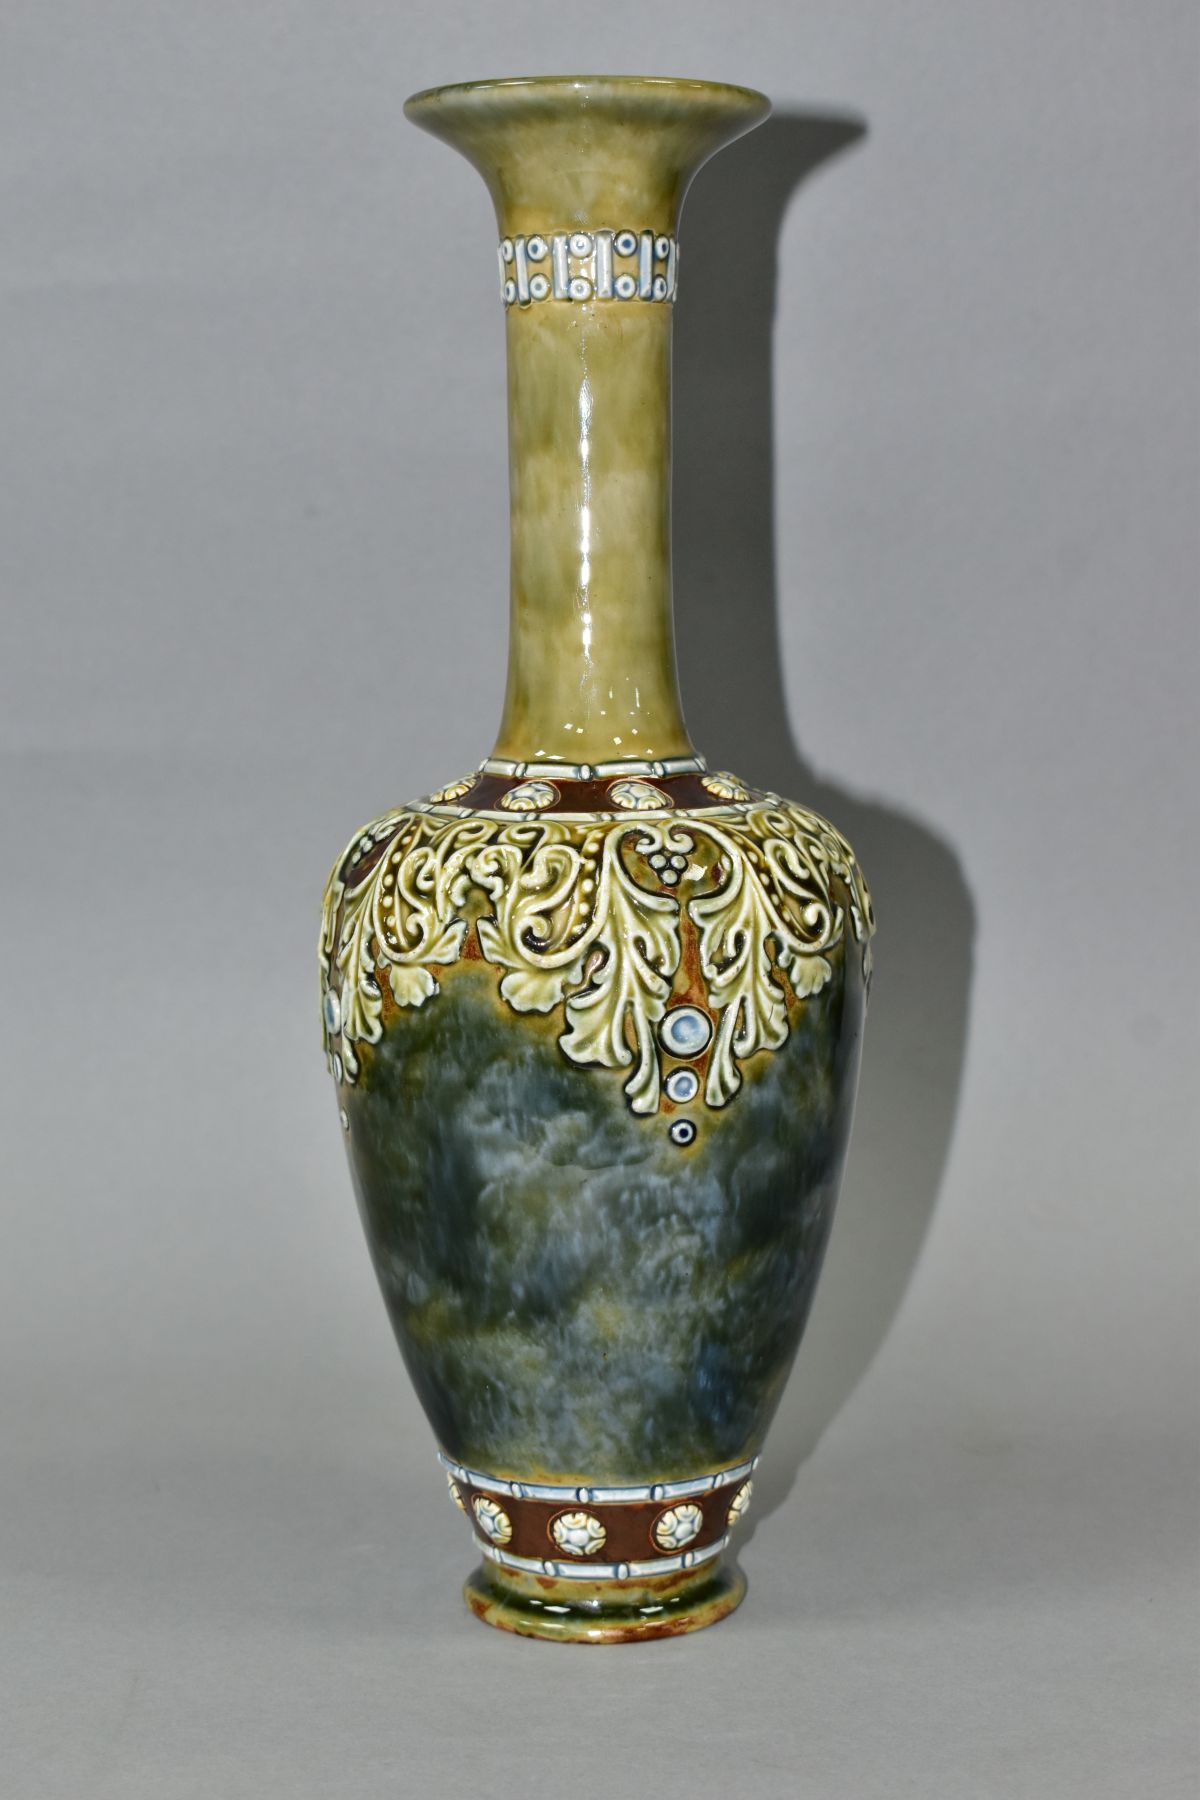 A ROYAL DOULTON STONEWARE BALUSTER VASE, mottled blue/green glaze with relief decorated foliate